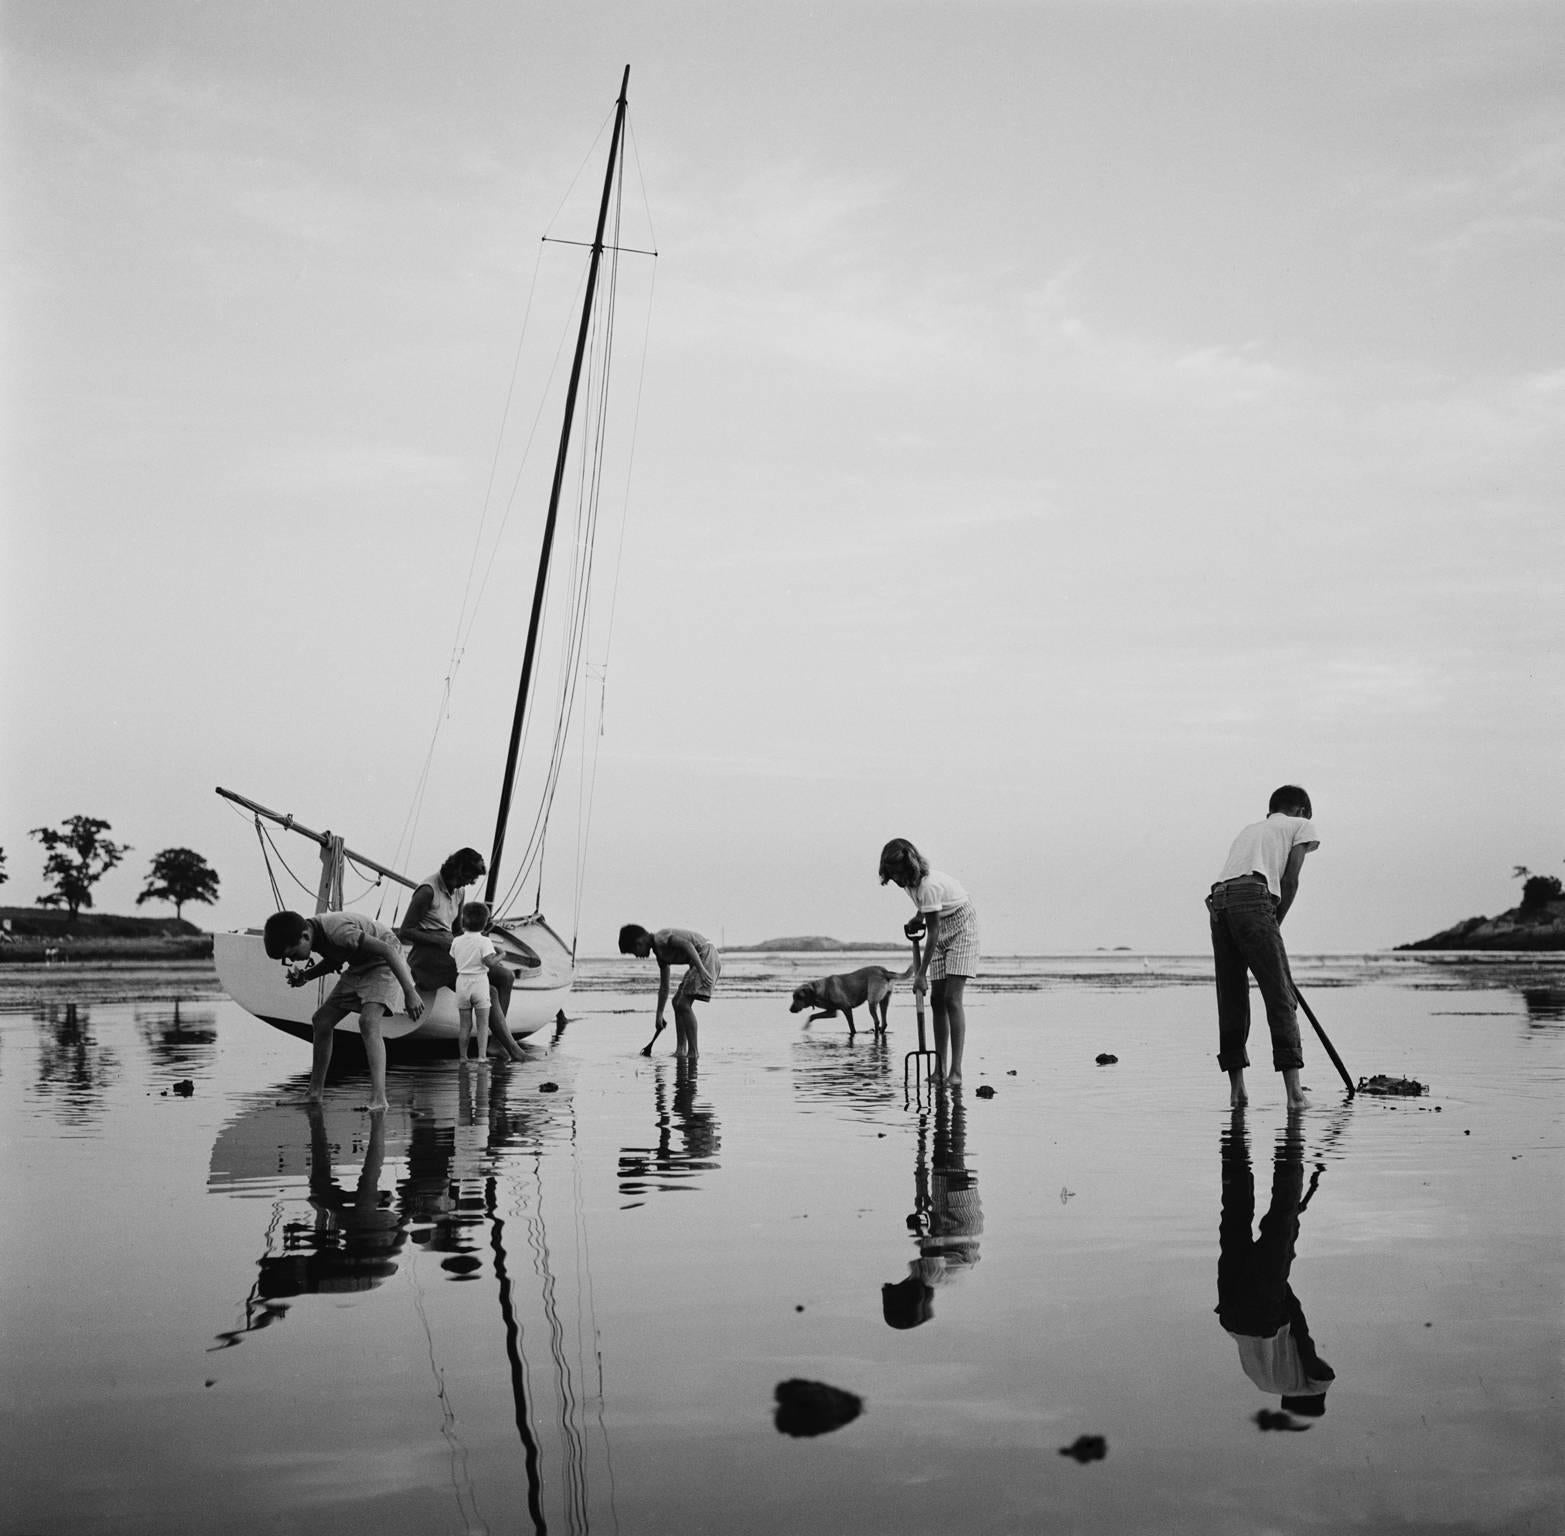 'Digging For Clams' by Slim Aarons

Mrs. Leverett Saltonstall Shaw watches her children digging for clams at low tide on Black Beach, with a sail boat on the sand behind them and joined by their dog in Massachusetts Bay, circa 1960. 

The image has